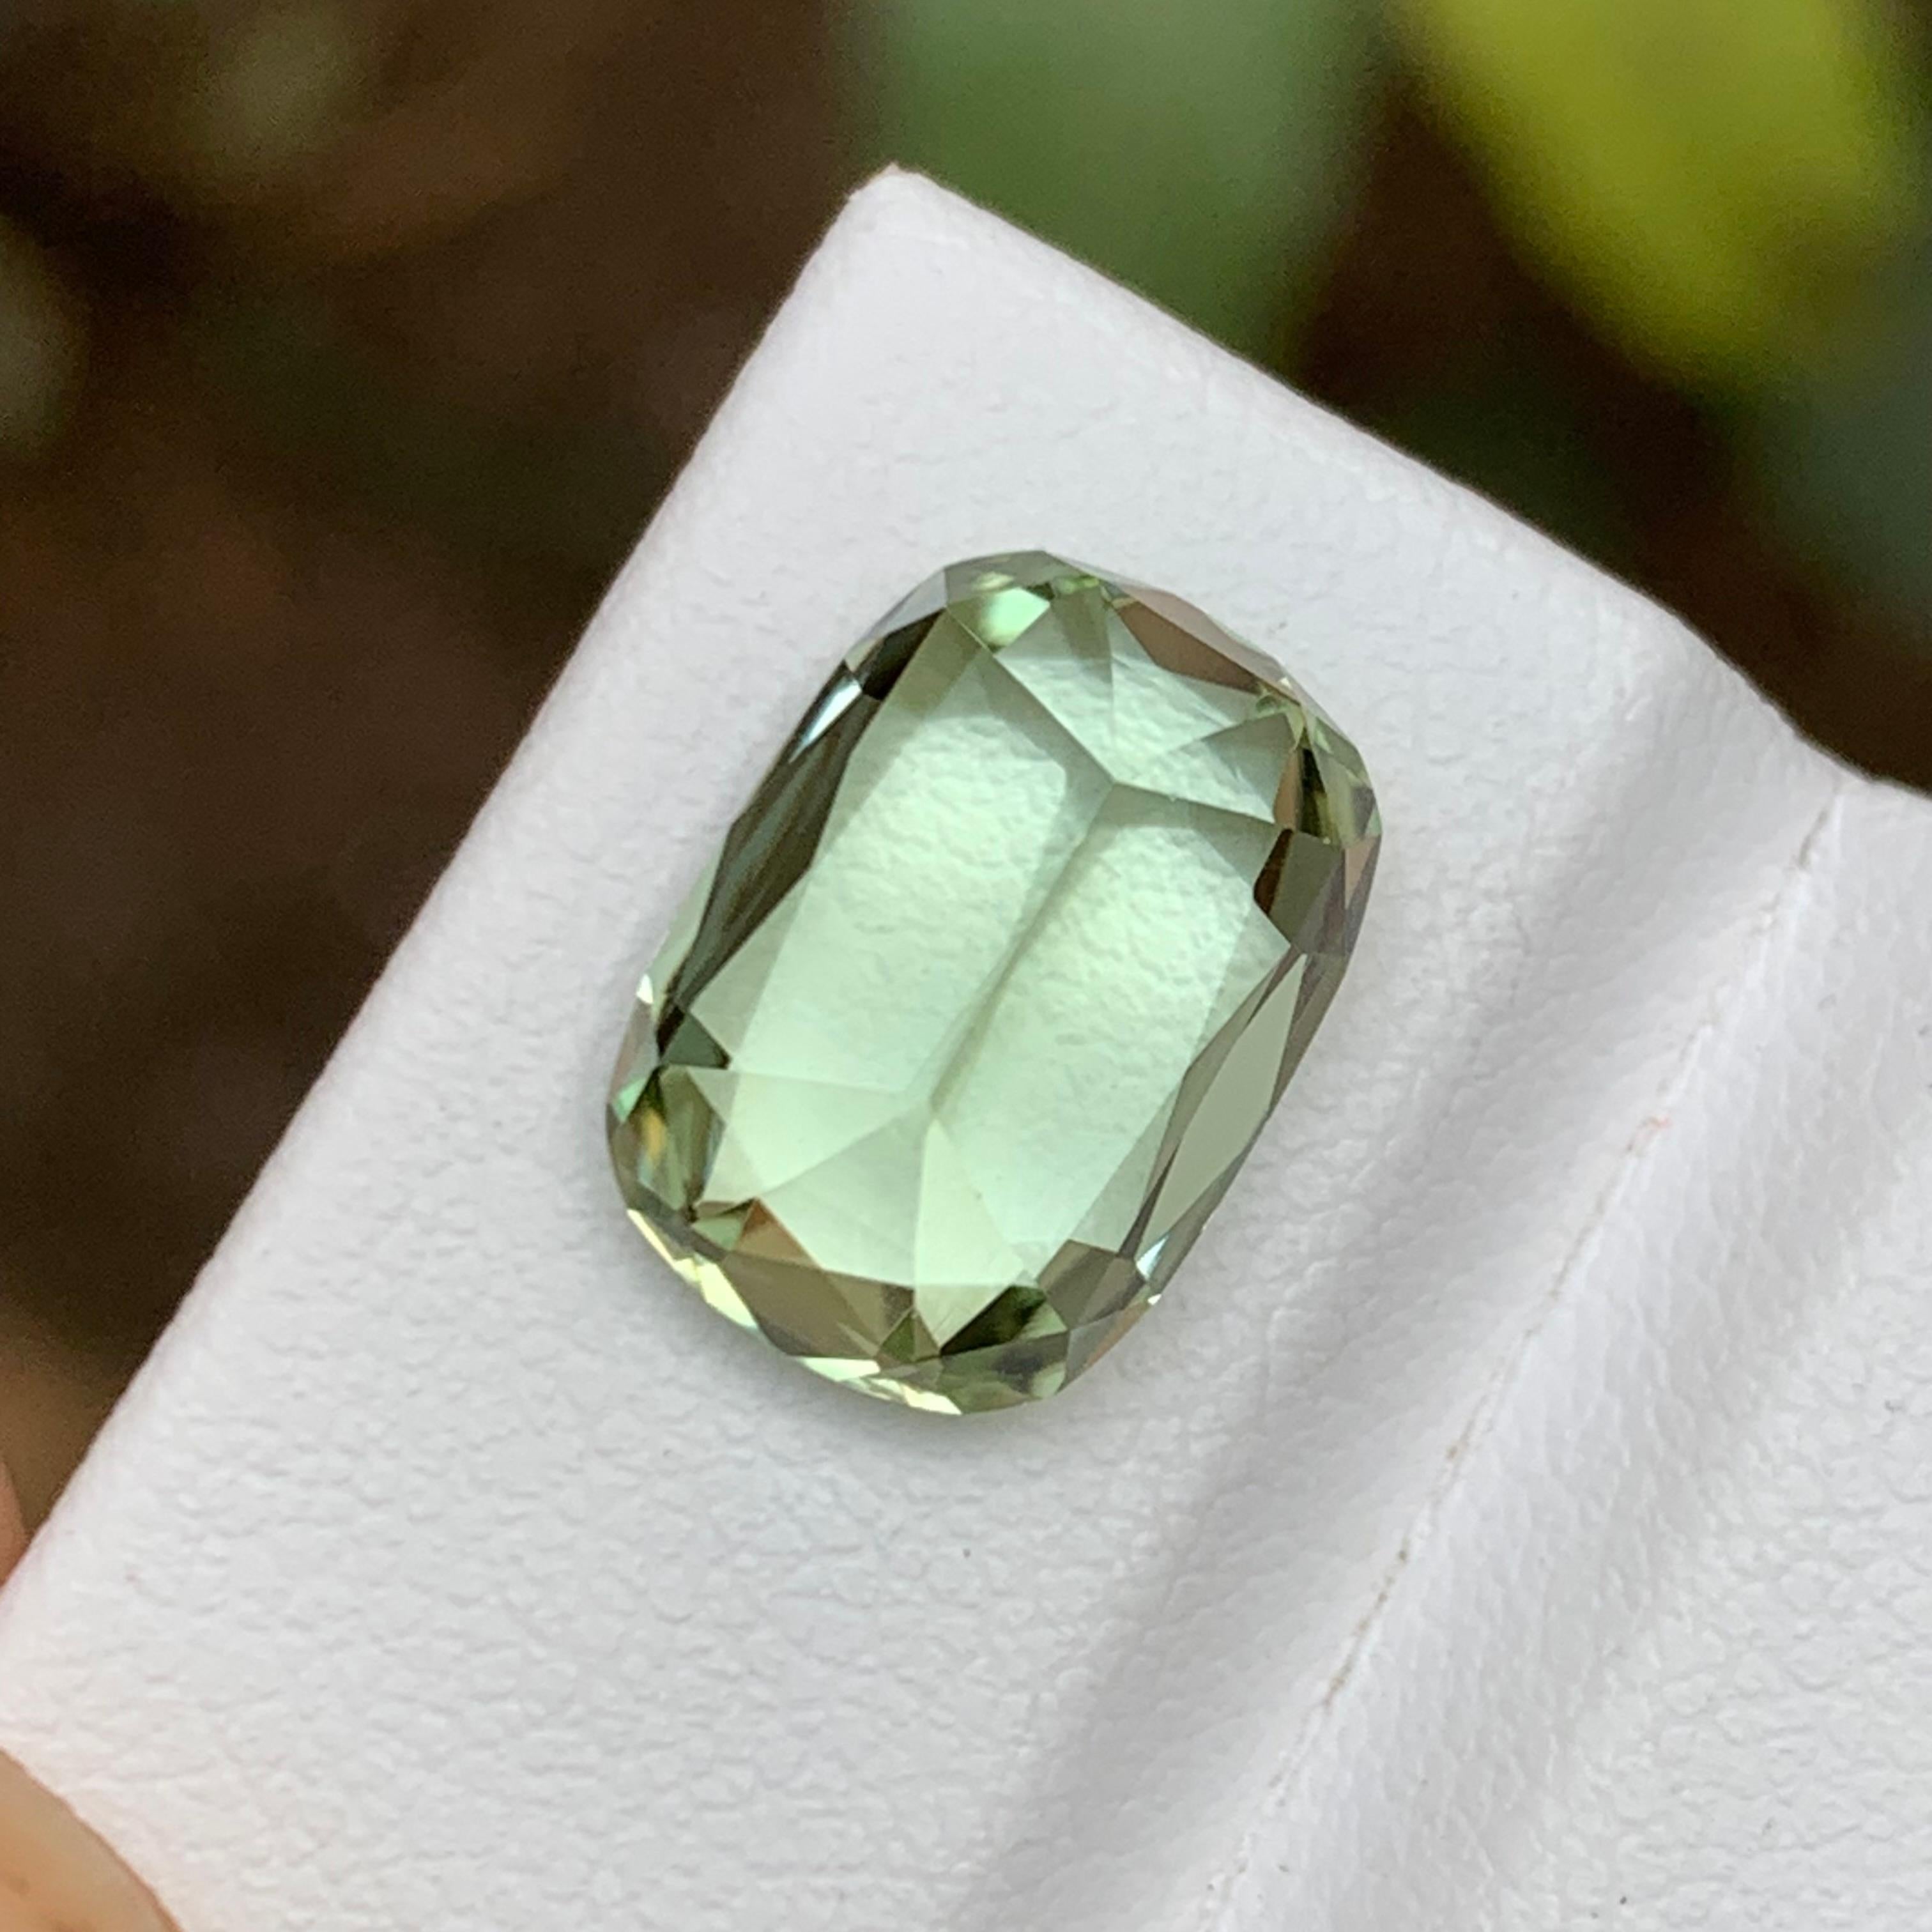 Pale Green Natural Tourmaline Gemstone 5.35 Ct Step Cushion Cut for Ring/Pendant For Sale 1